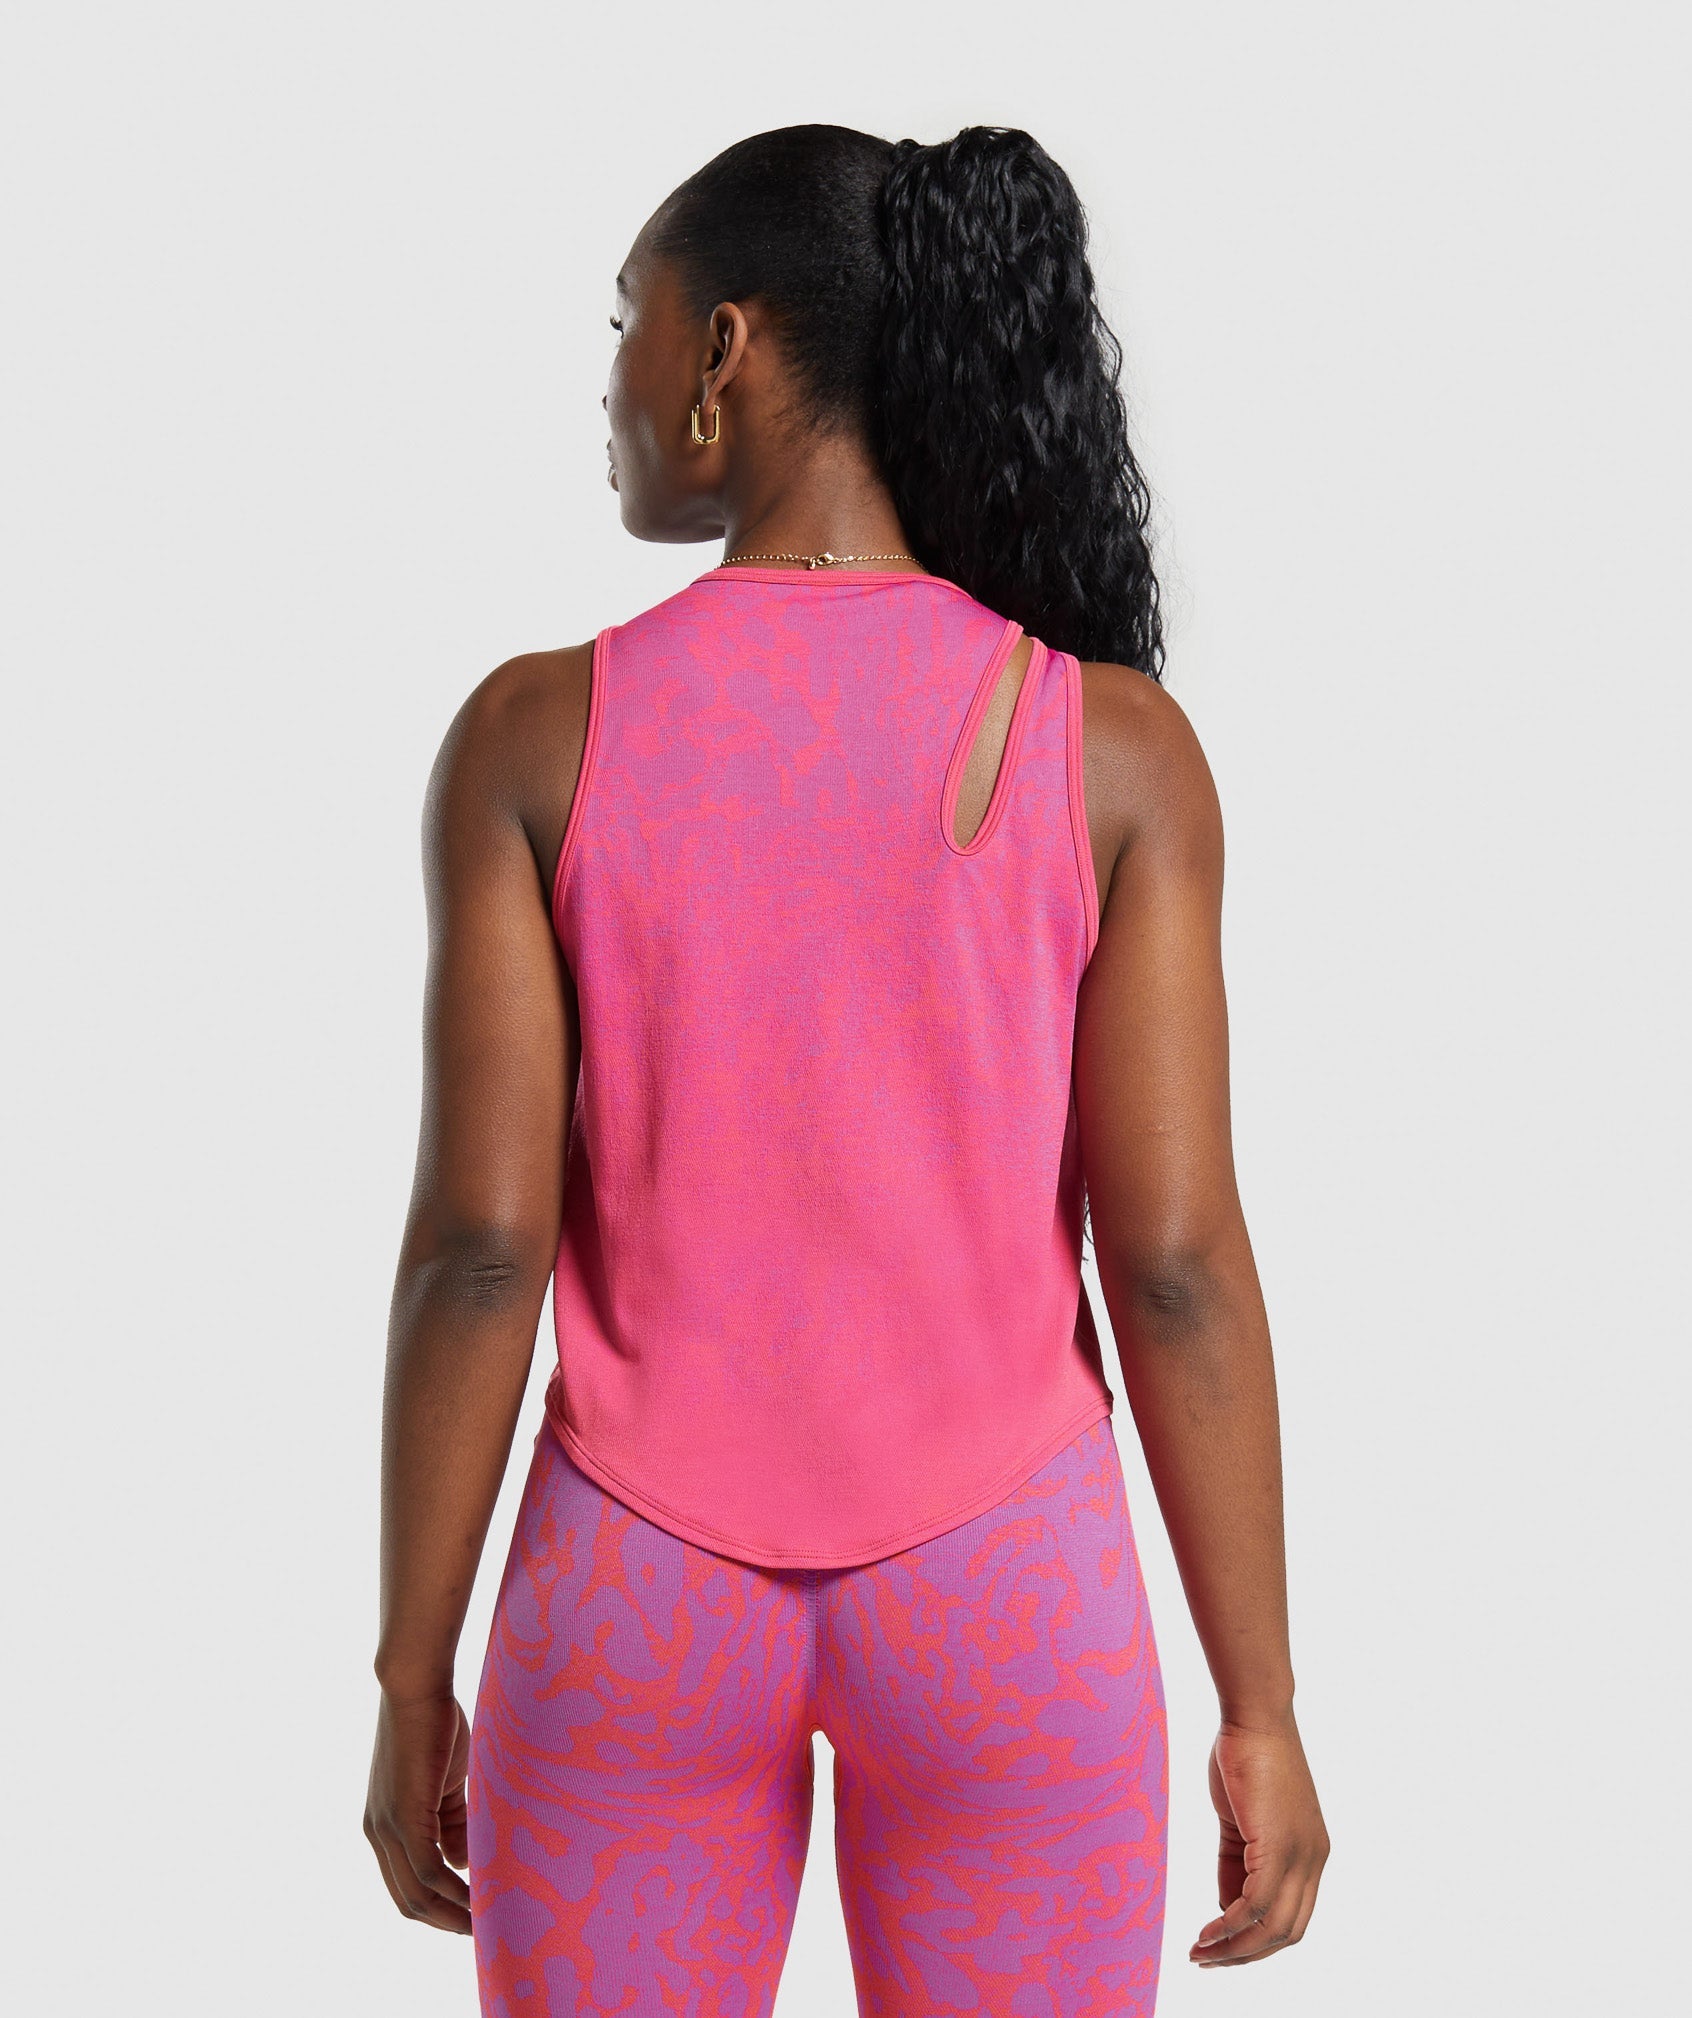 Adapt Safari Seamless Drop Arm Faded Tank in Shelly Pink/Fly Coral - view 2